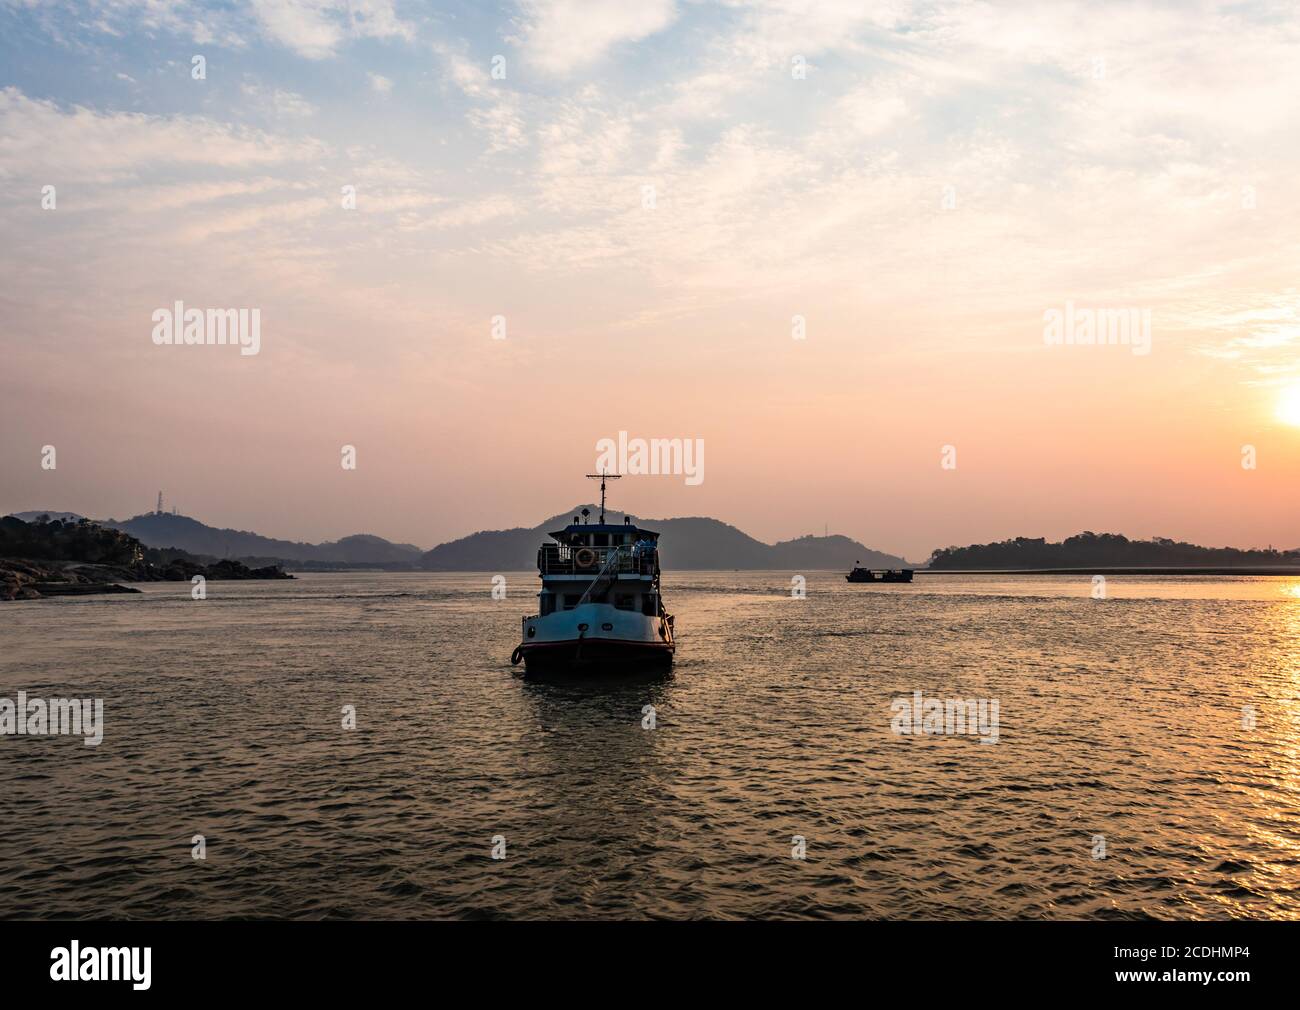 ship heading towards river island at dusk image is taken at peacock island guwahati assam india. it is showing the serene beauty of nature at dusk. Stock Photo